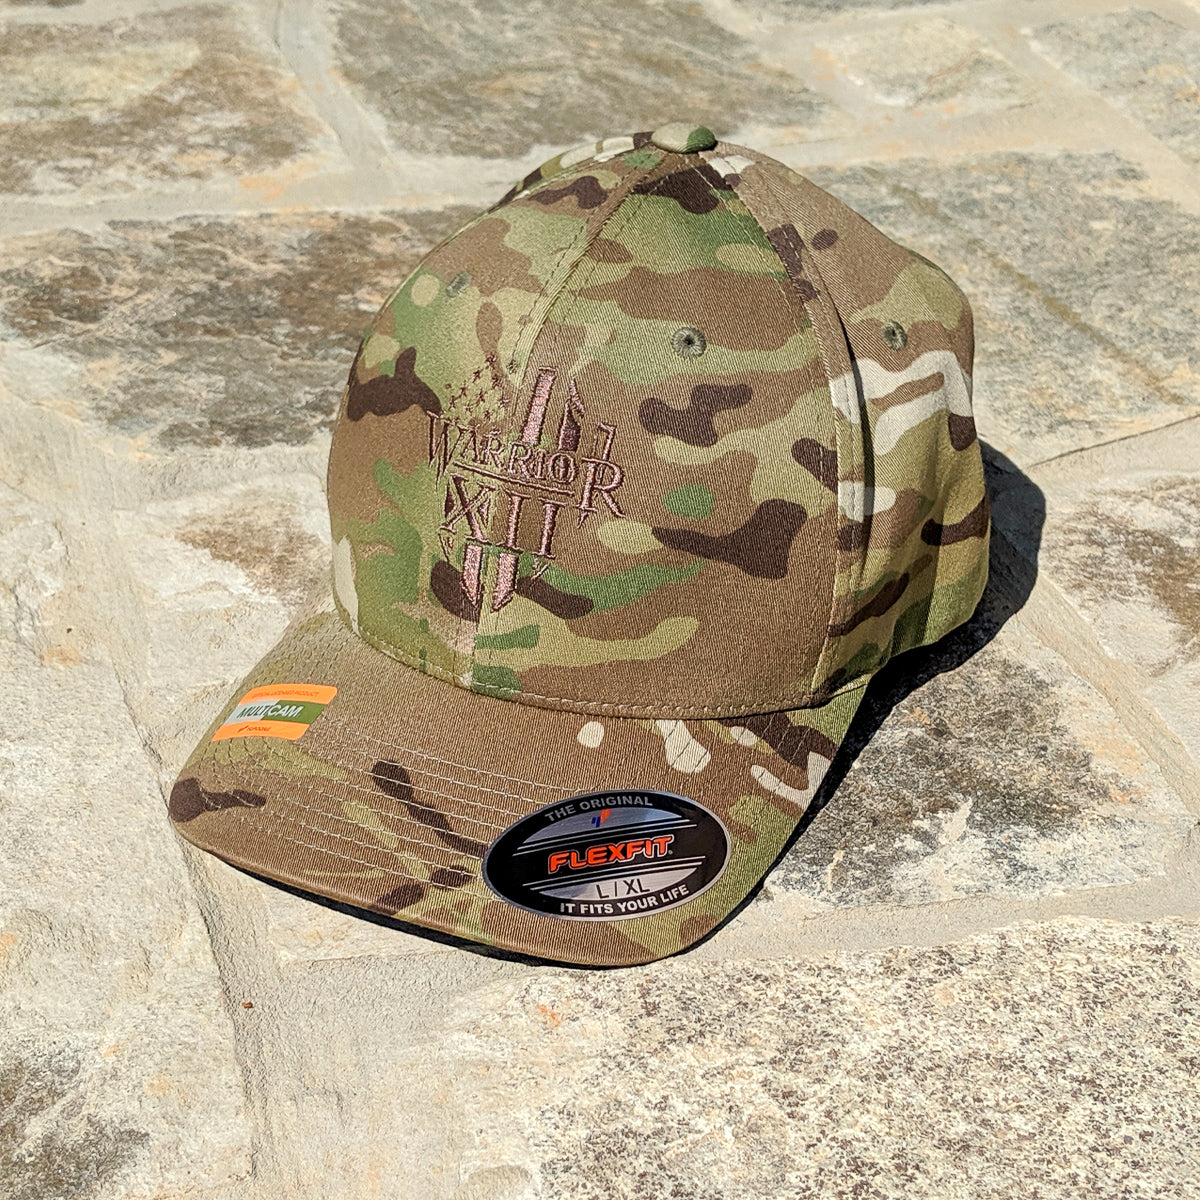 A Flexfit hat that features the Warrior 12 shield embroidered on a Multicam green flexfit hat.